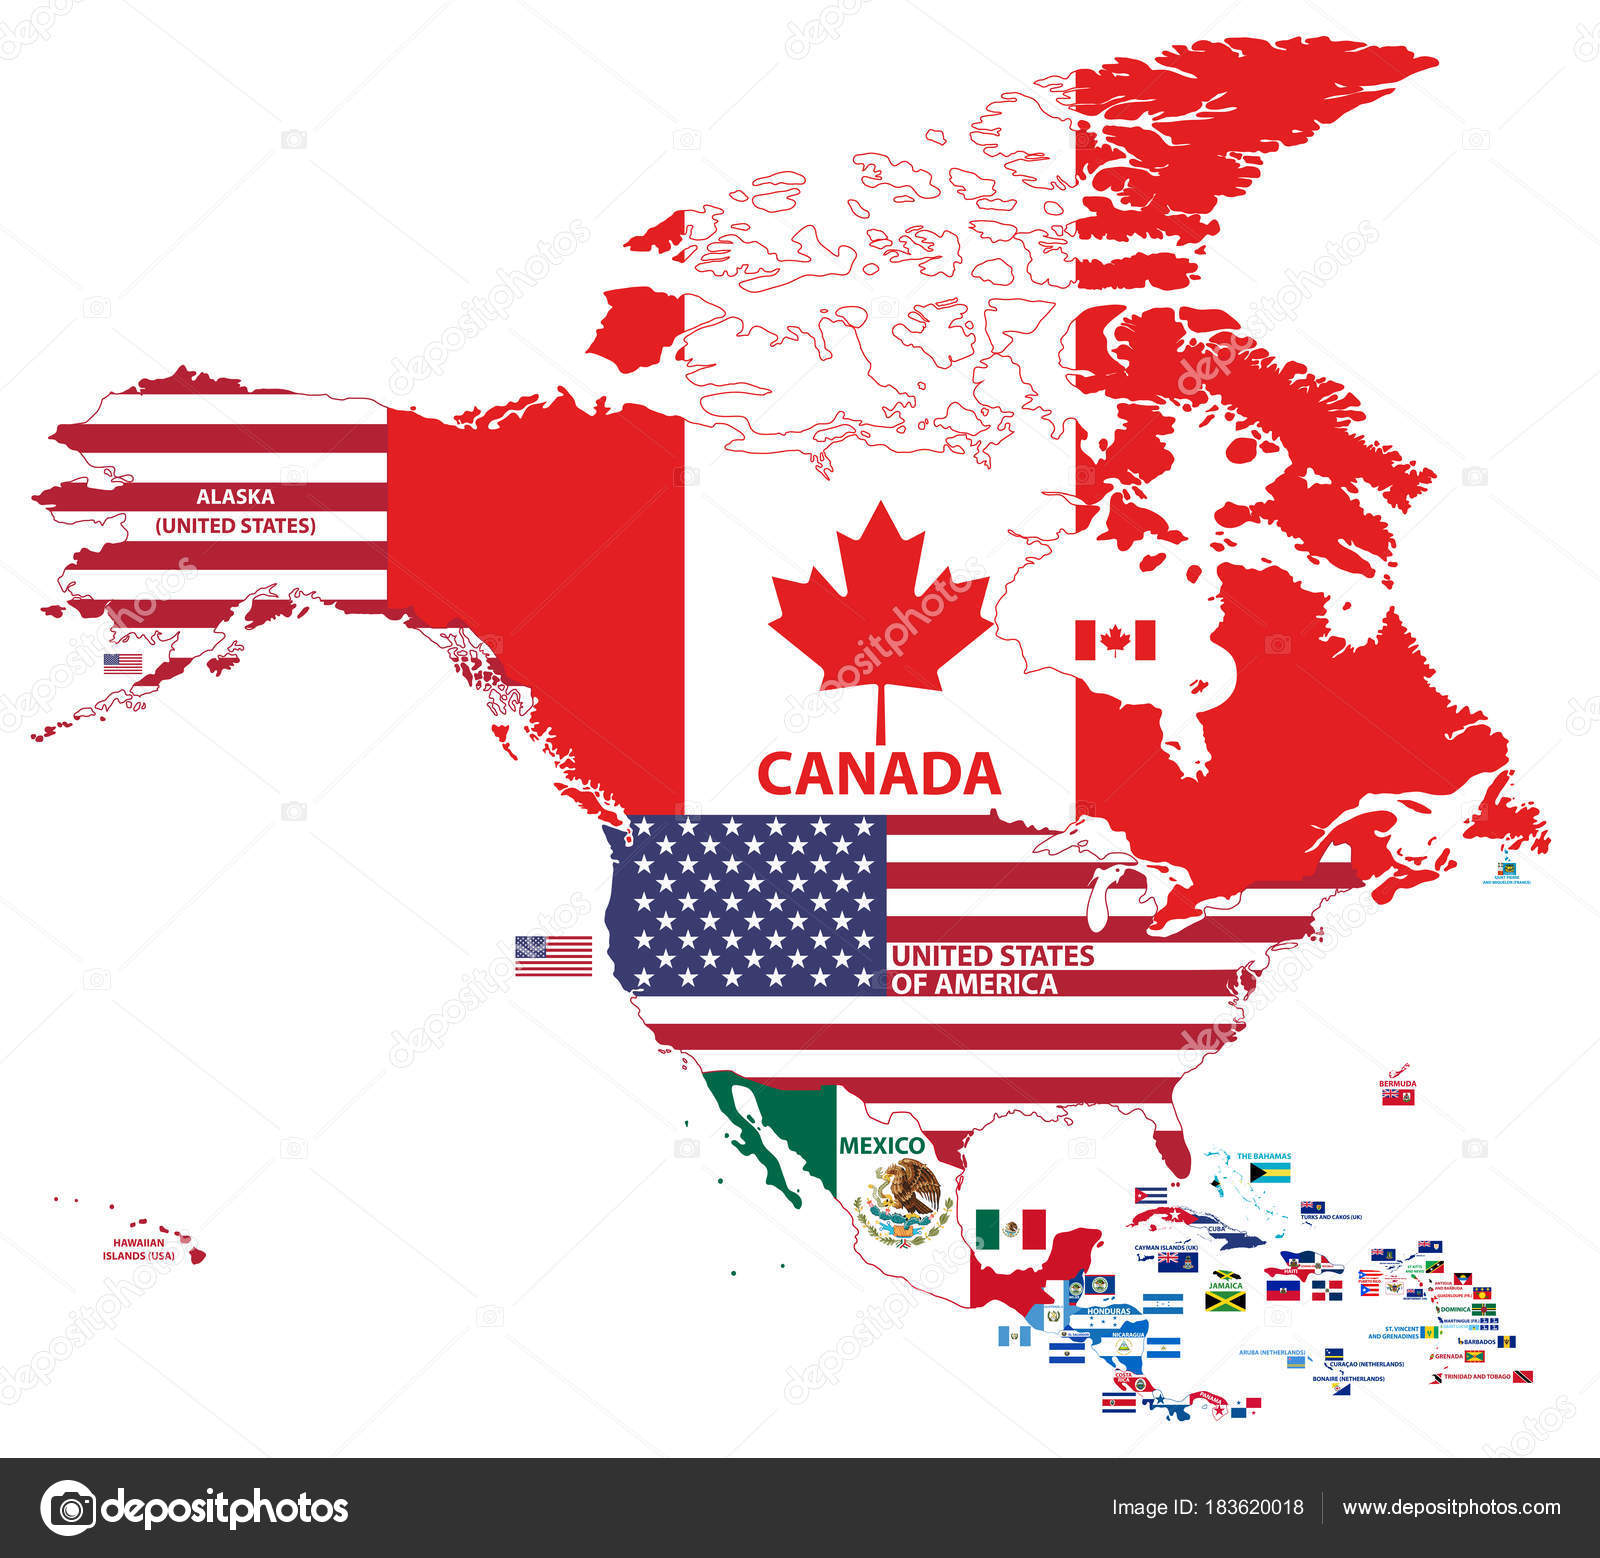 Vector Illustration North America Map Include Northern America Central